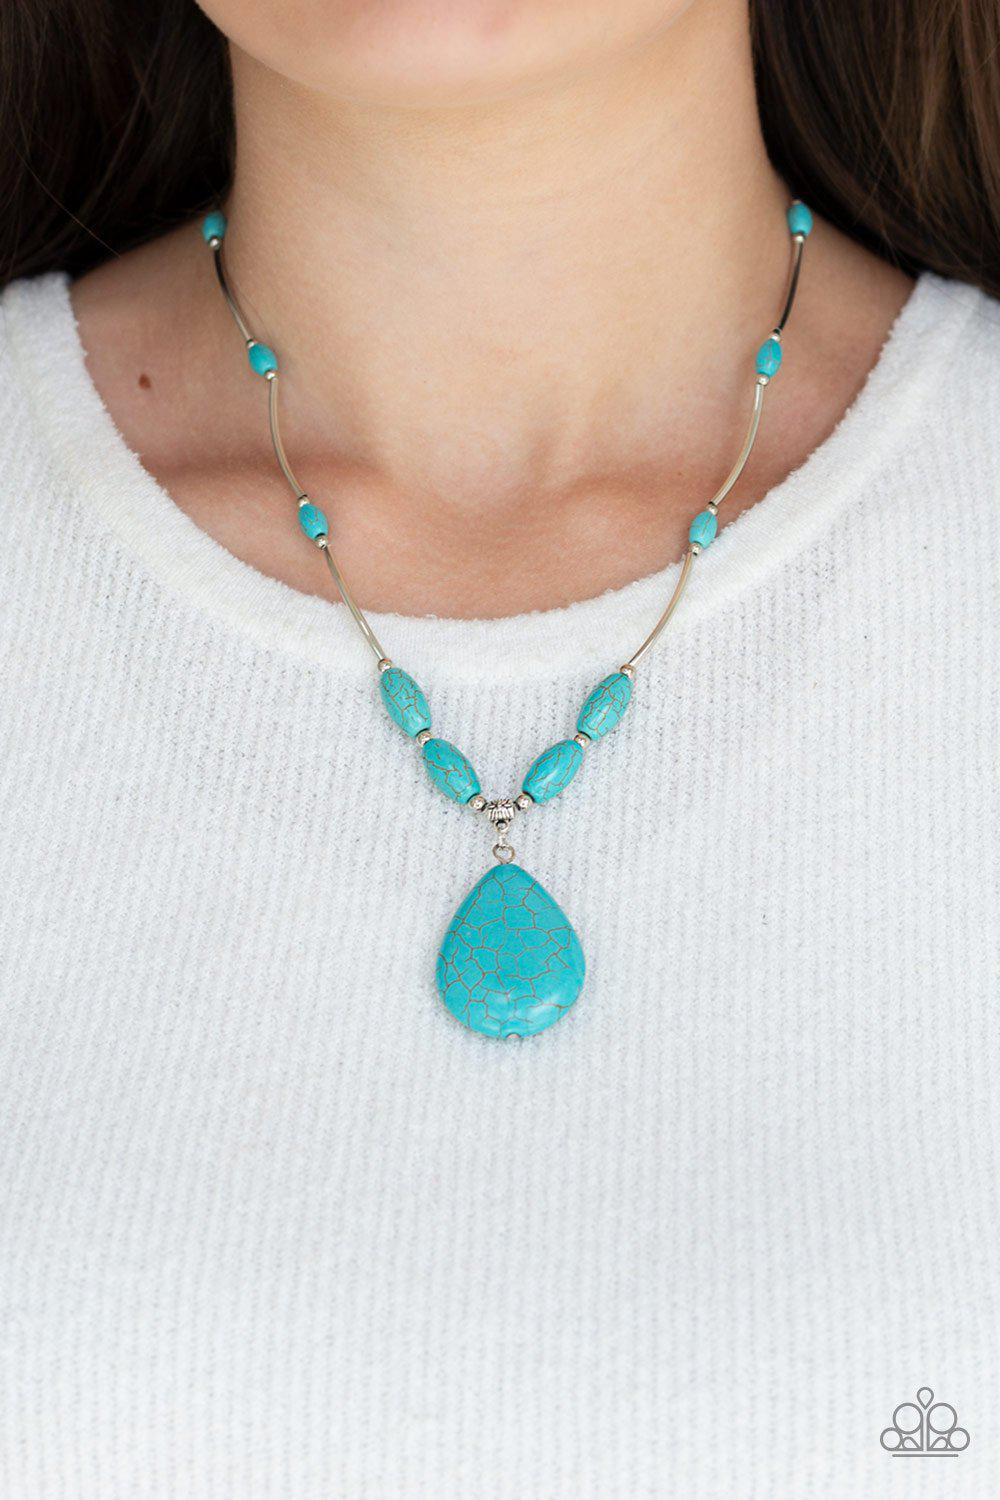 Explore The Elements Turquoise Blue Stone Necklace - Paparazzi Accessories-CarasShop.com - $5 Jewelry by Cara Jewels